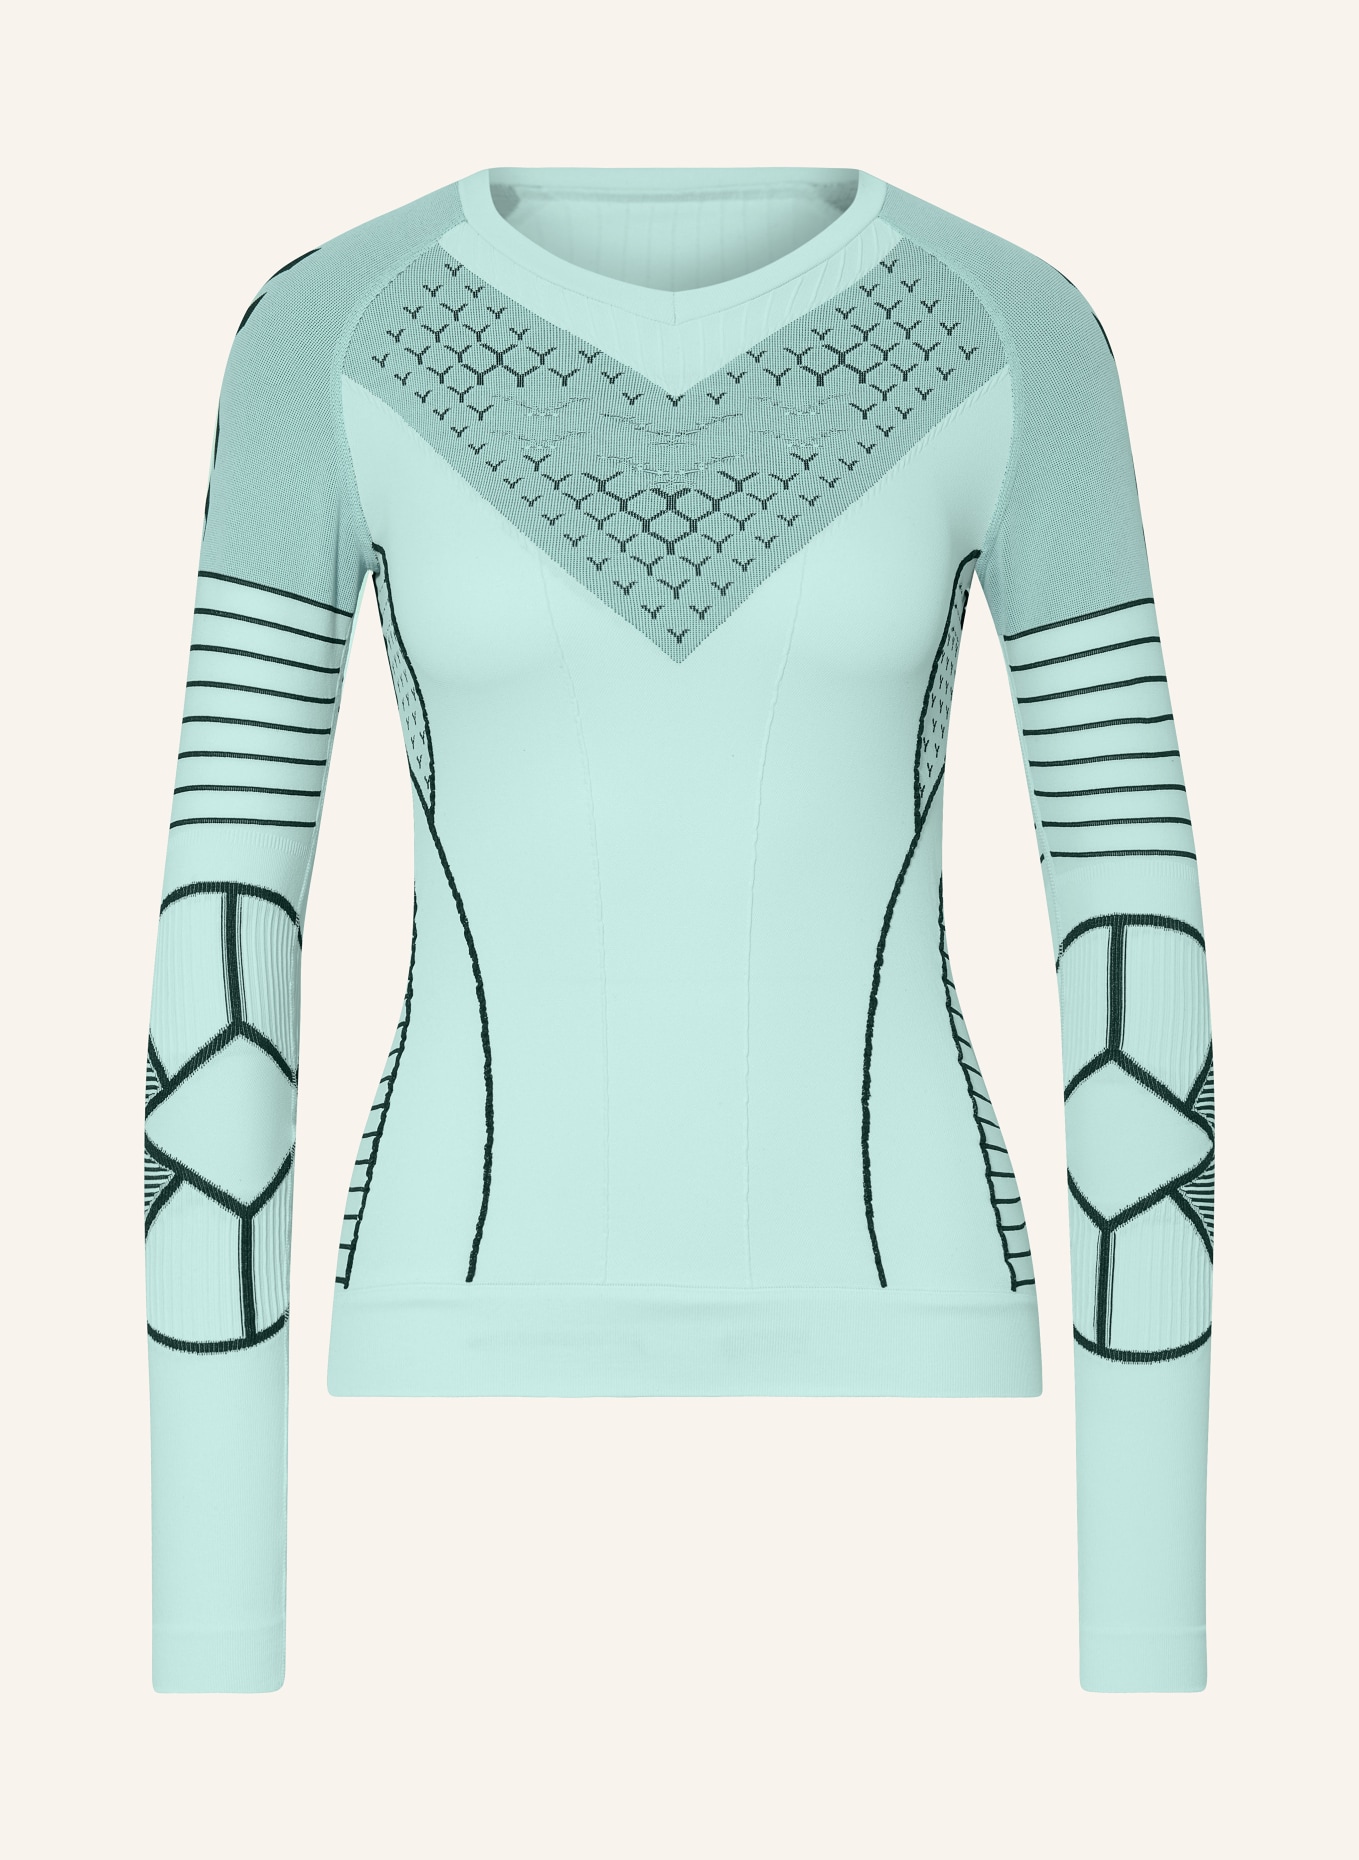 X-BIONIC Functional underwear shirt TWYCE RACE, Color: TURQUOISE/ BLACK (Image 1)